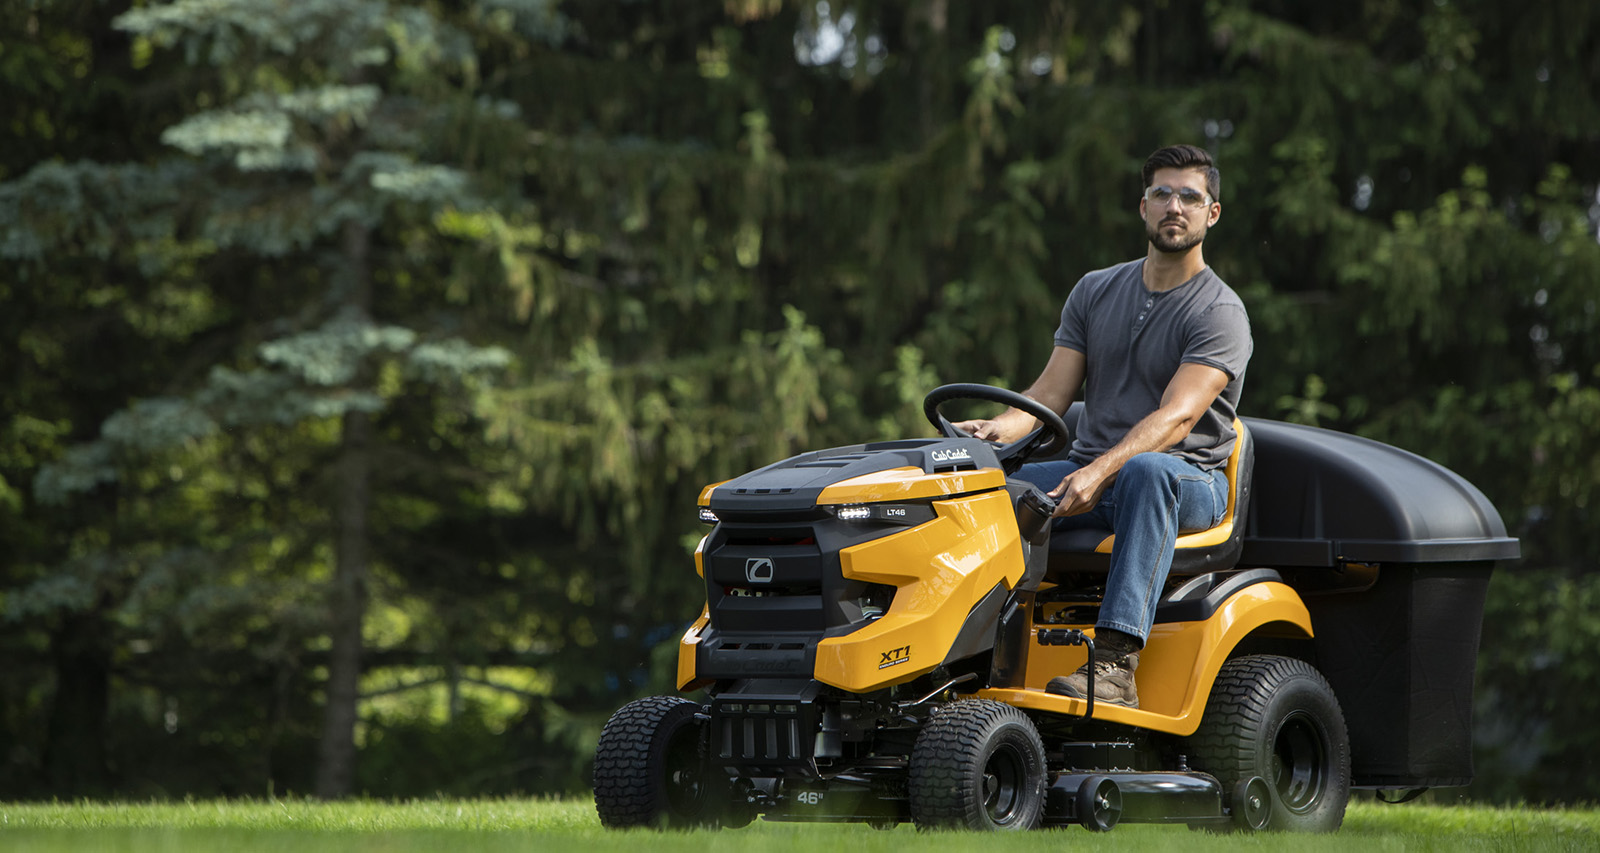 person riding yellow colored lawn mower